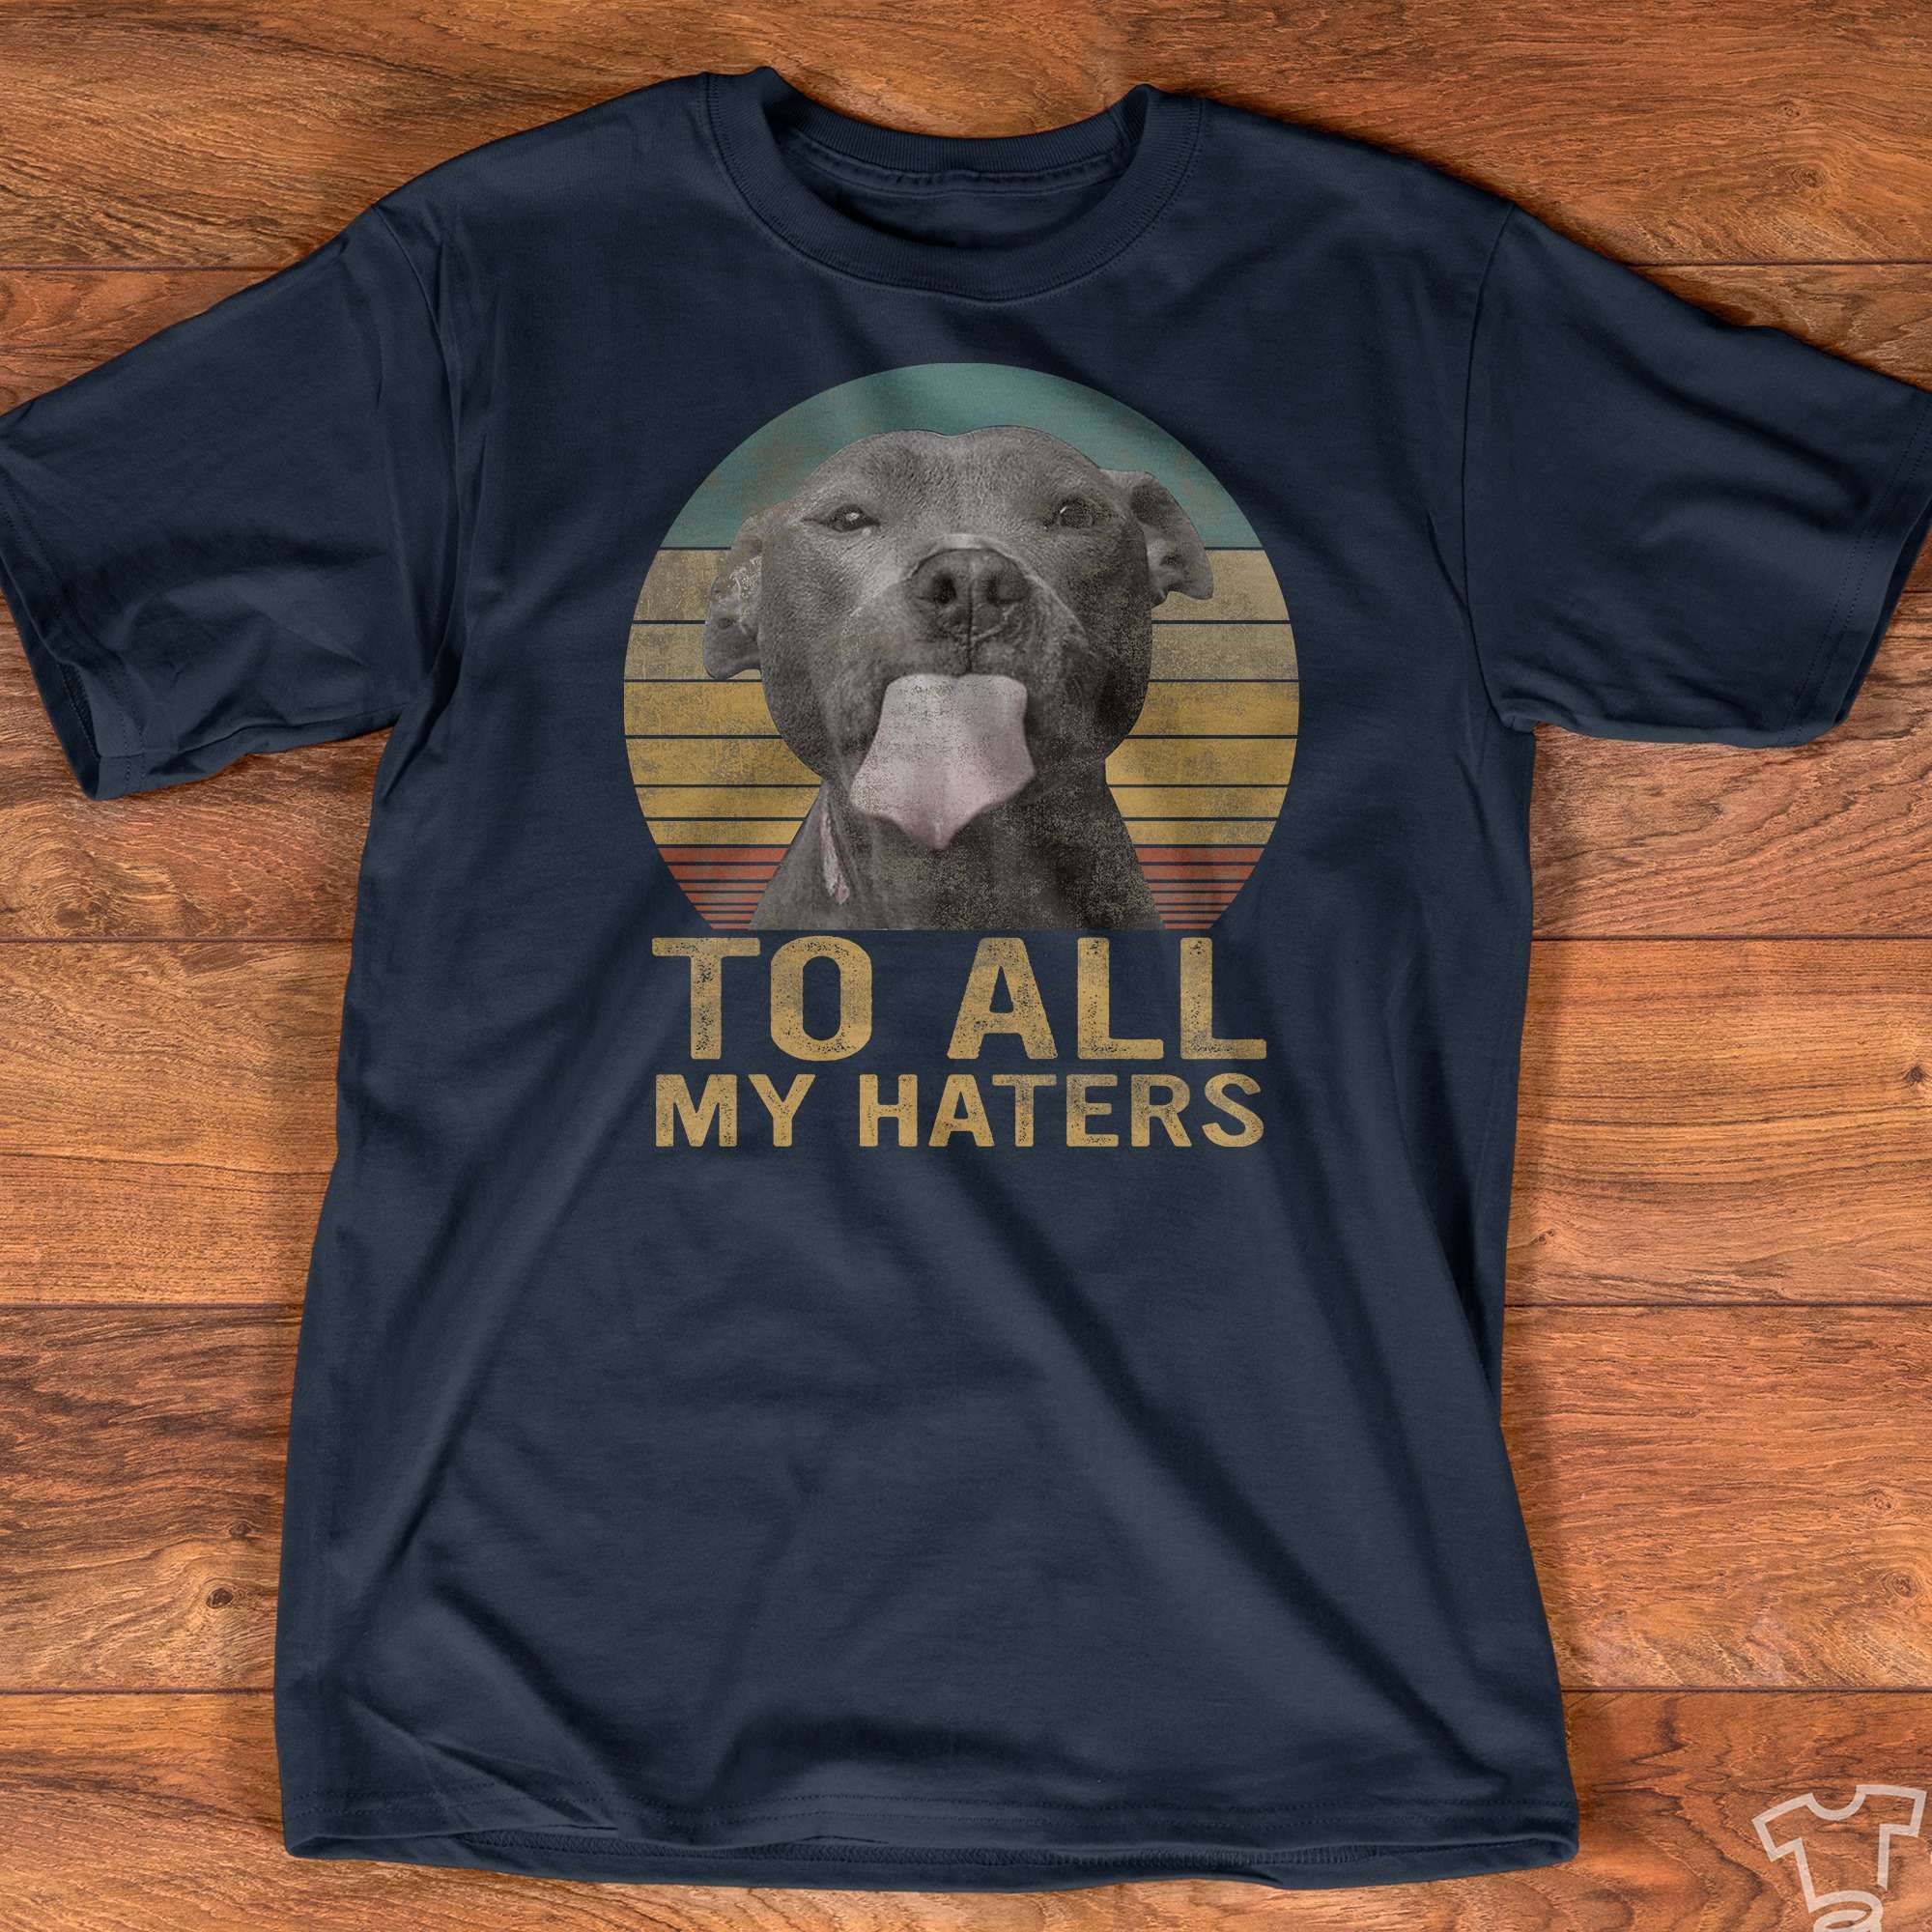 Pitbull Dog - To all my haters